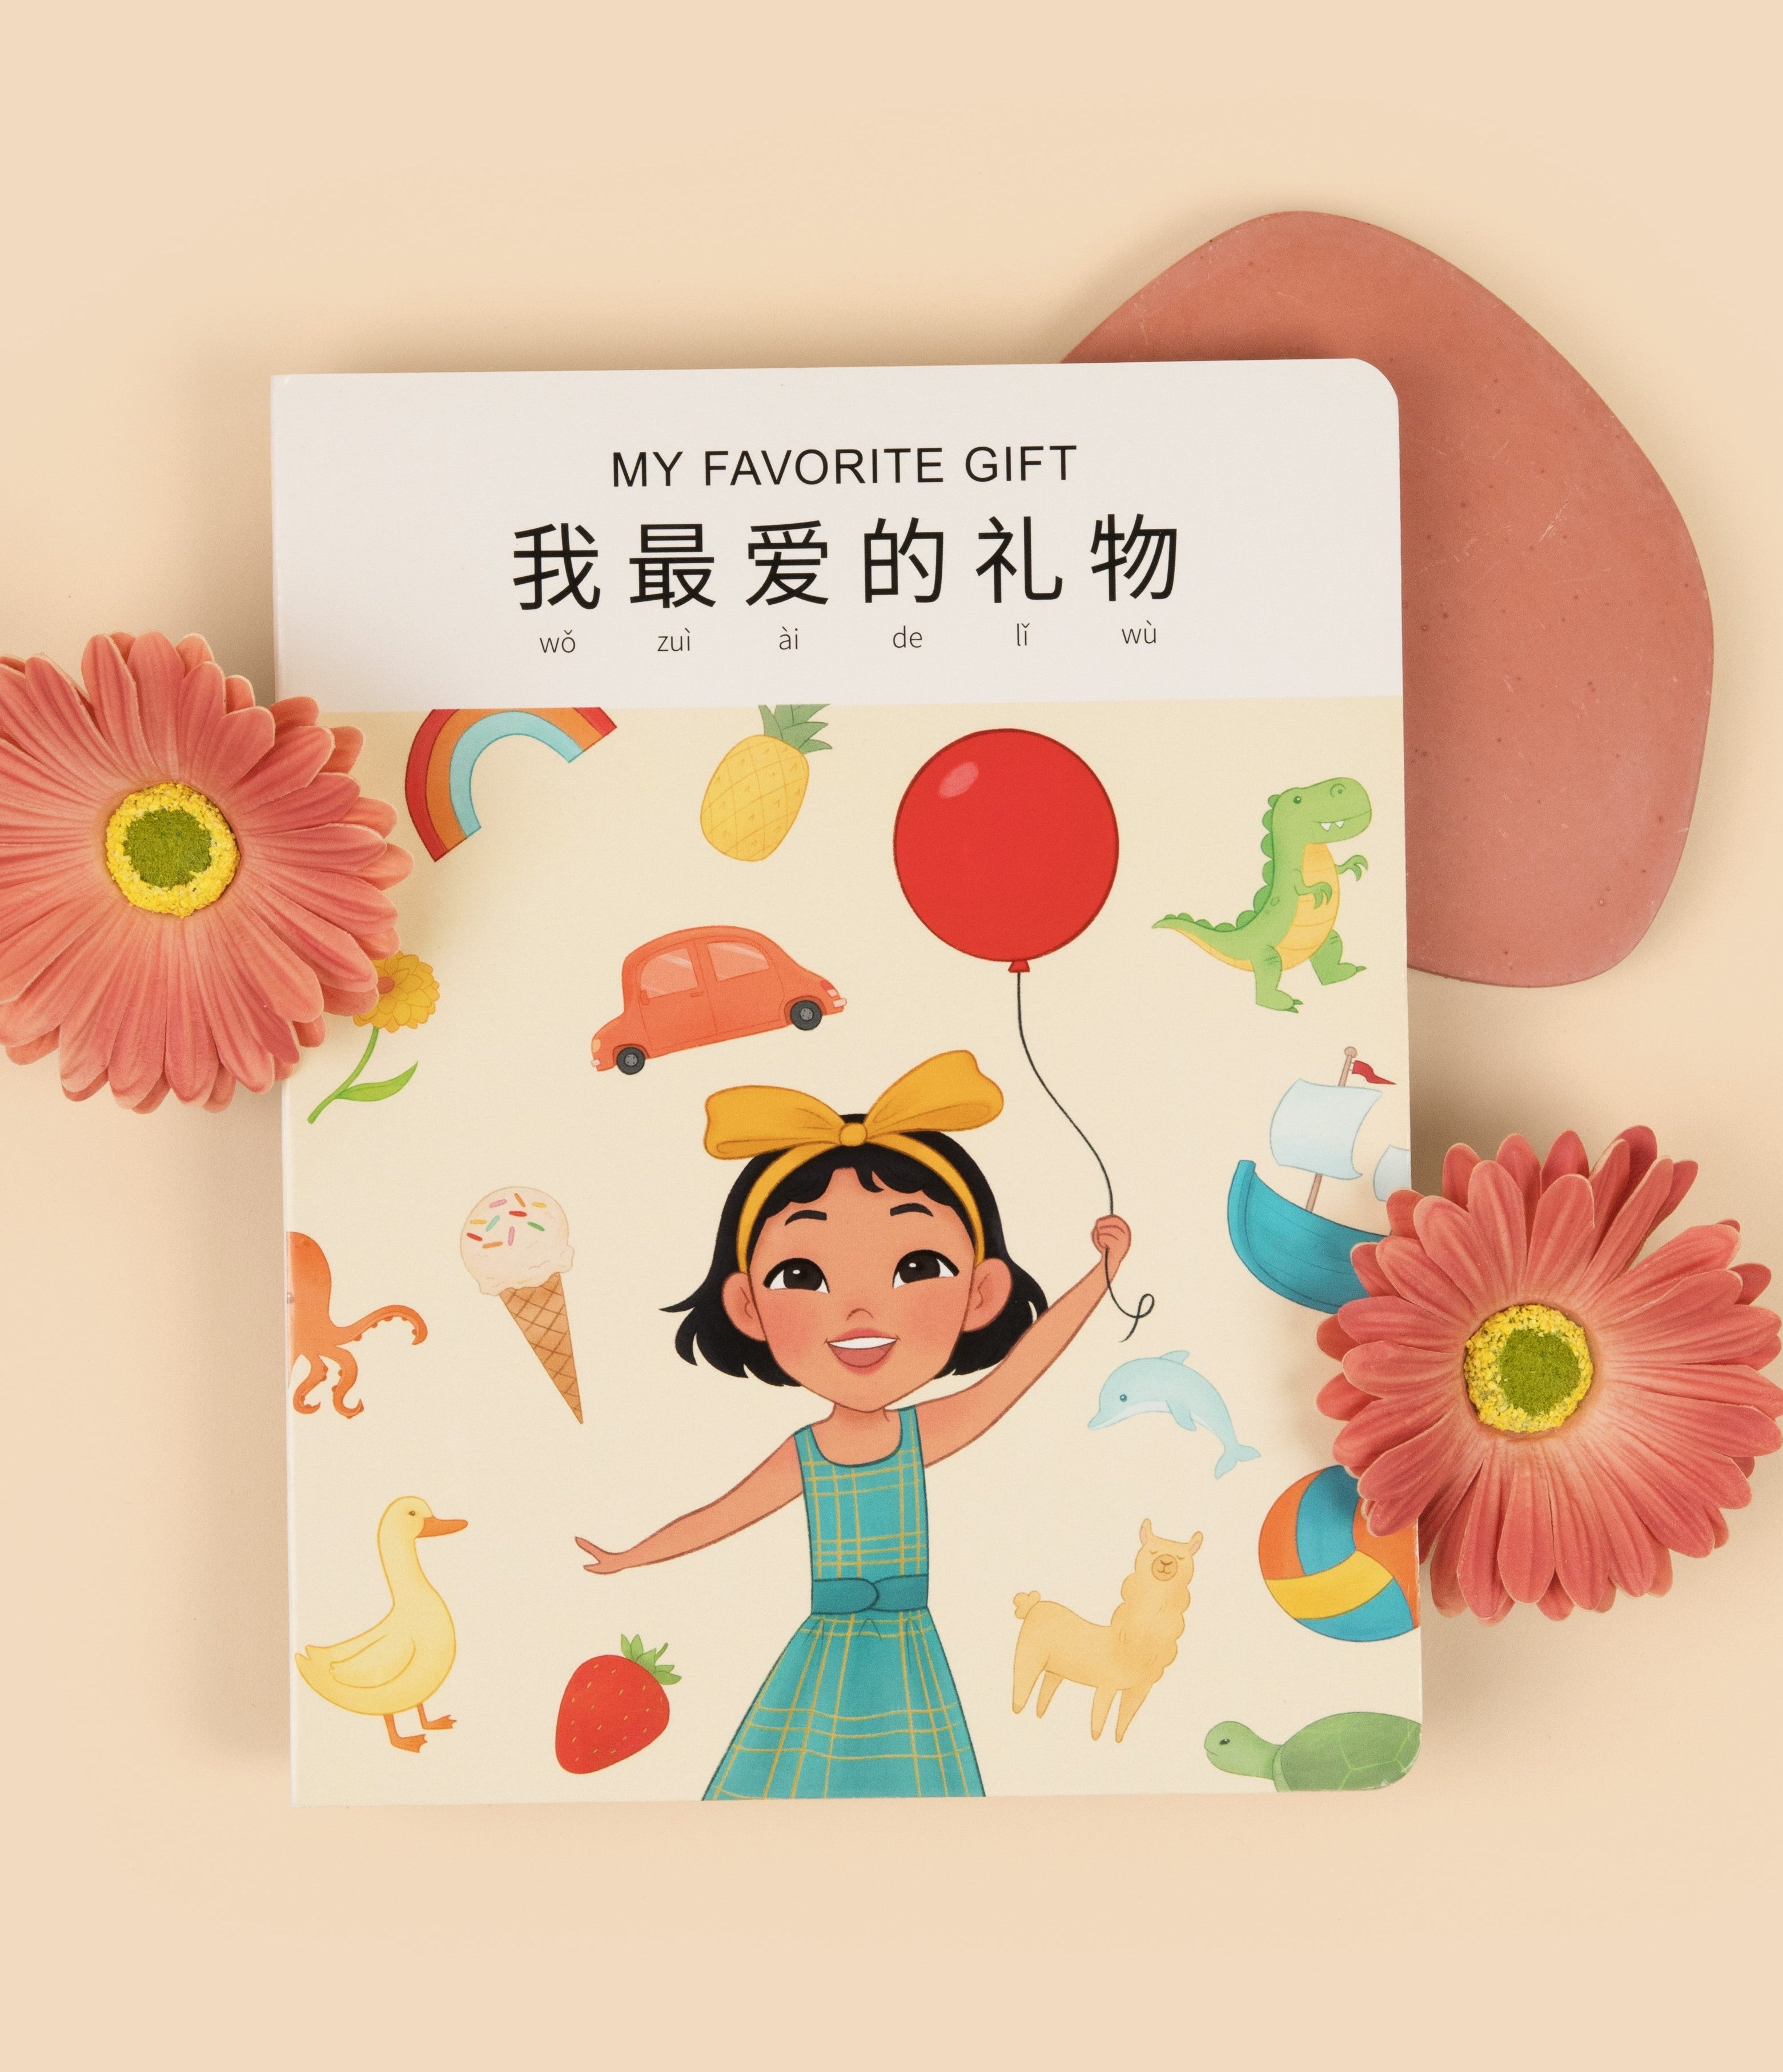 My Favorite Gift bilingual book in Mandarin-English by Spark Collection